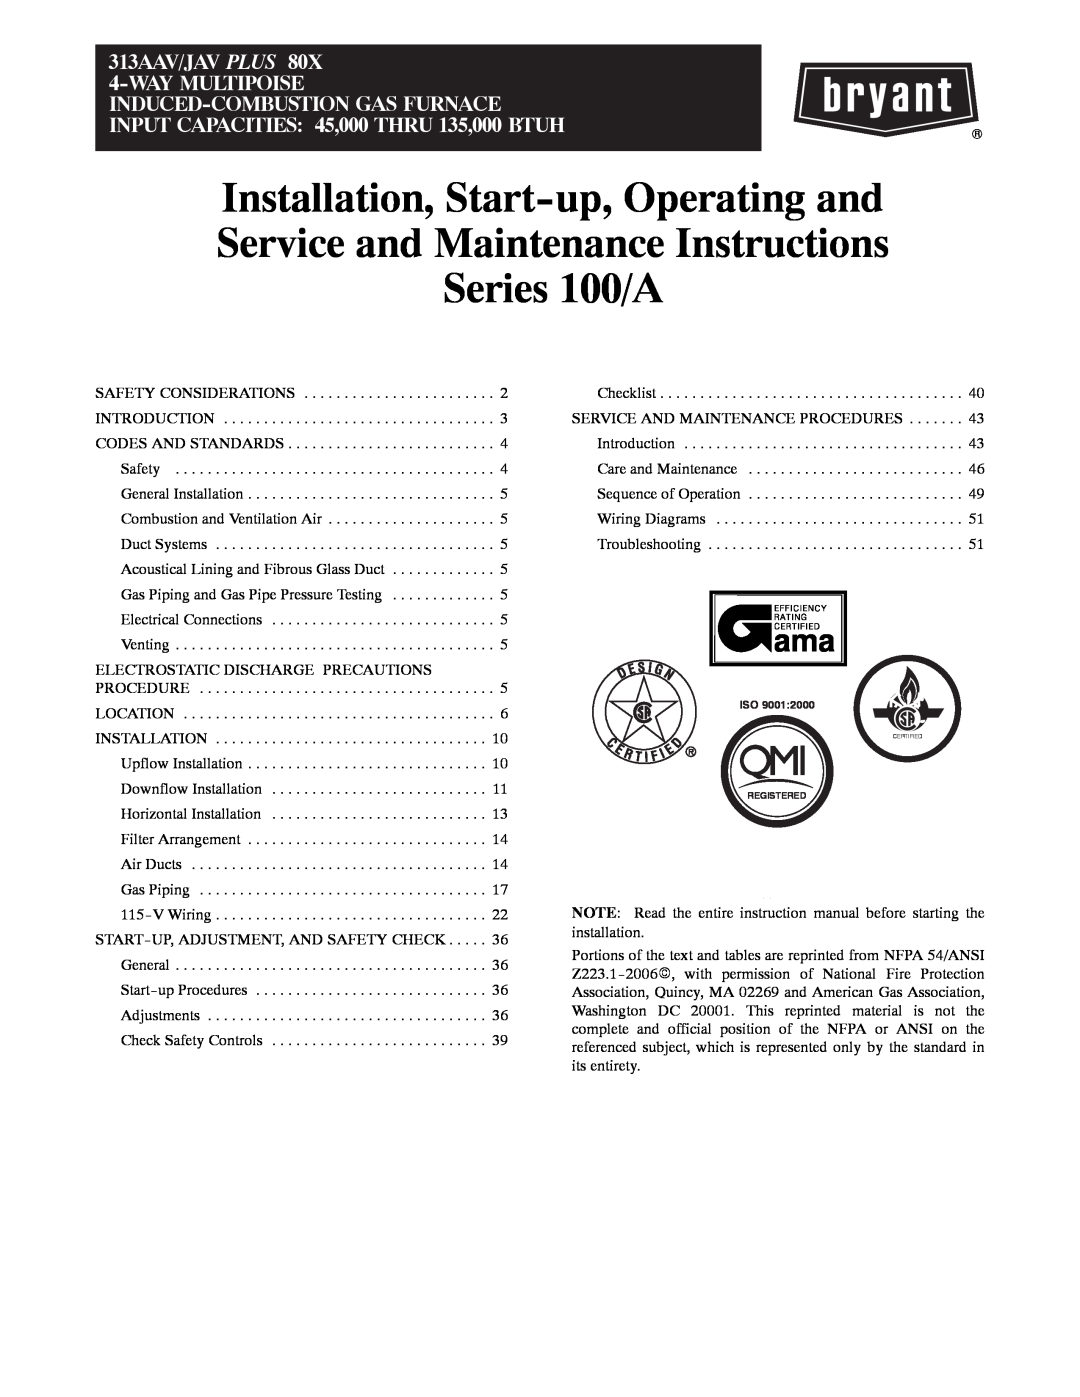 Bryant 313AAV instruction manual Installation, Start-up,Operating and, Service and Maintenance Instructions Series 100/A 